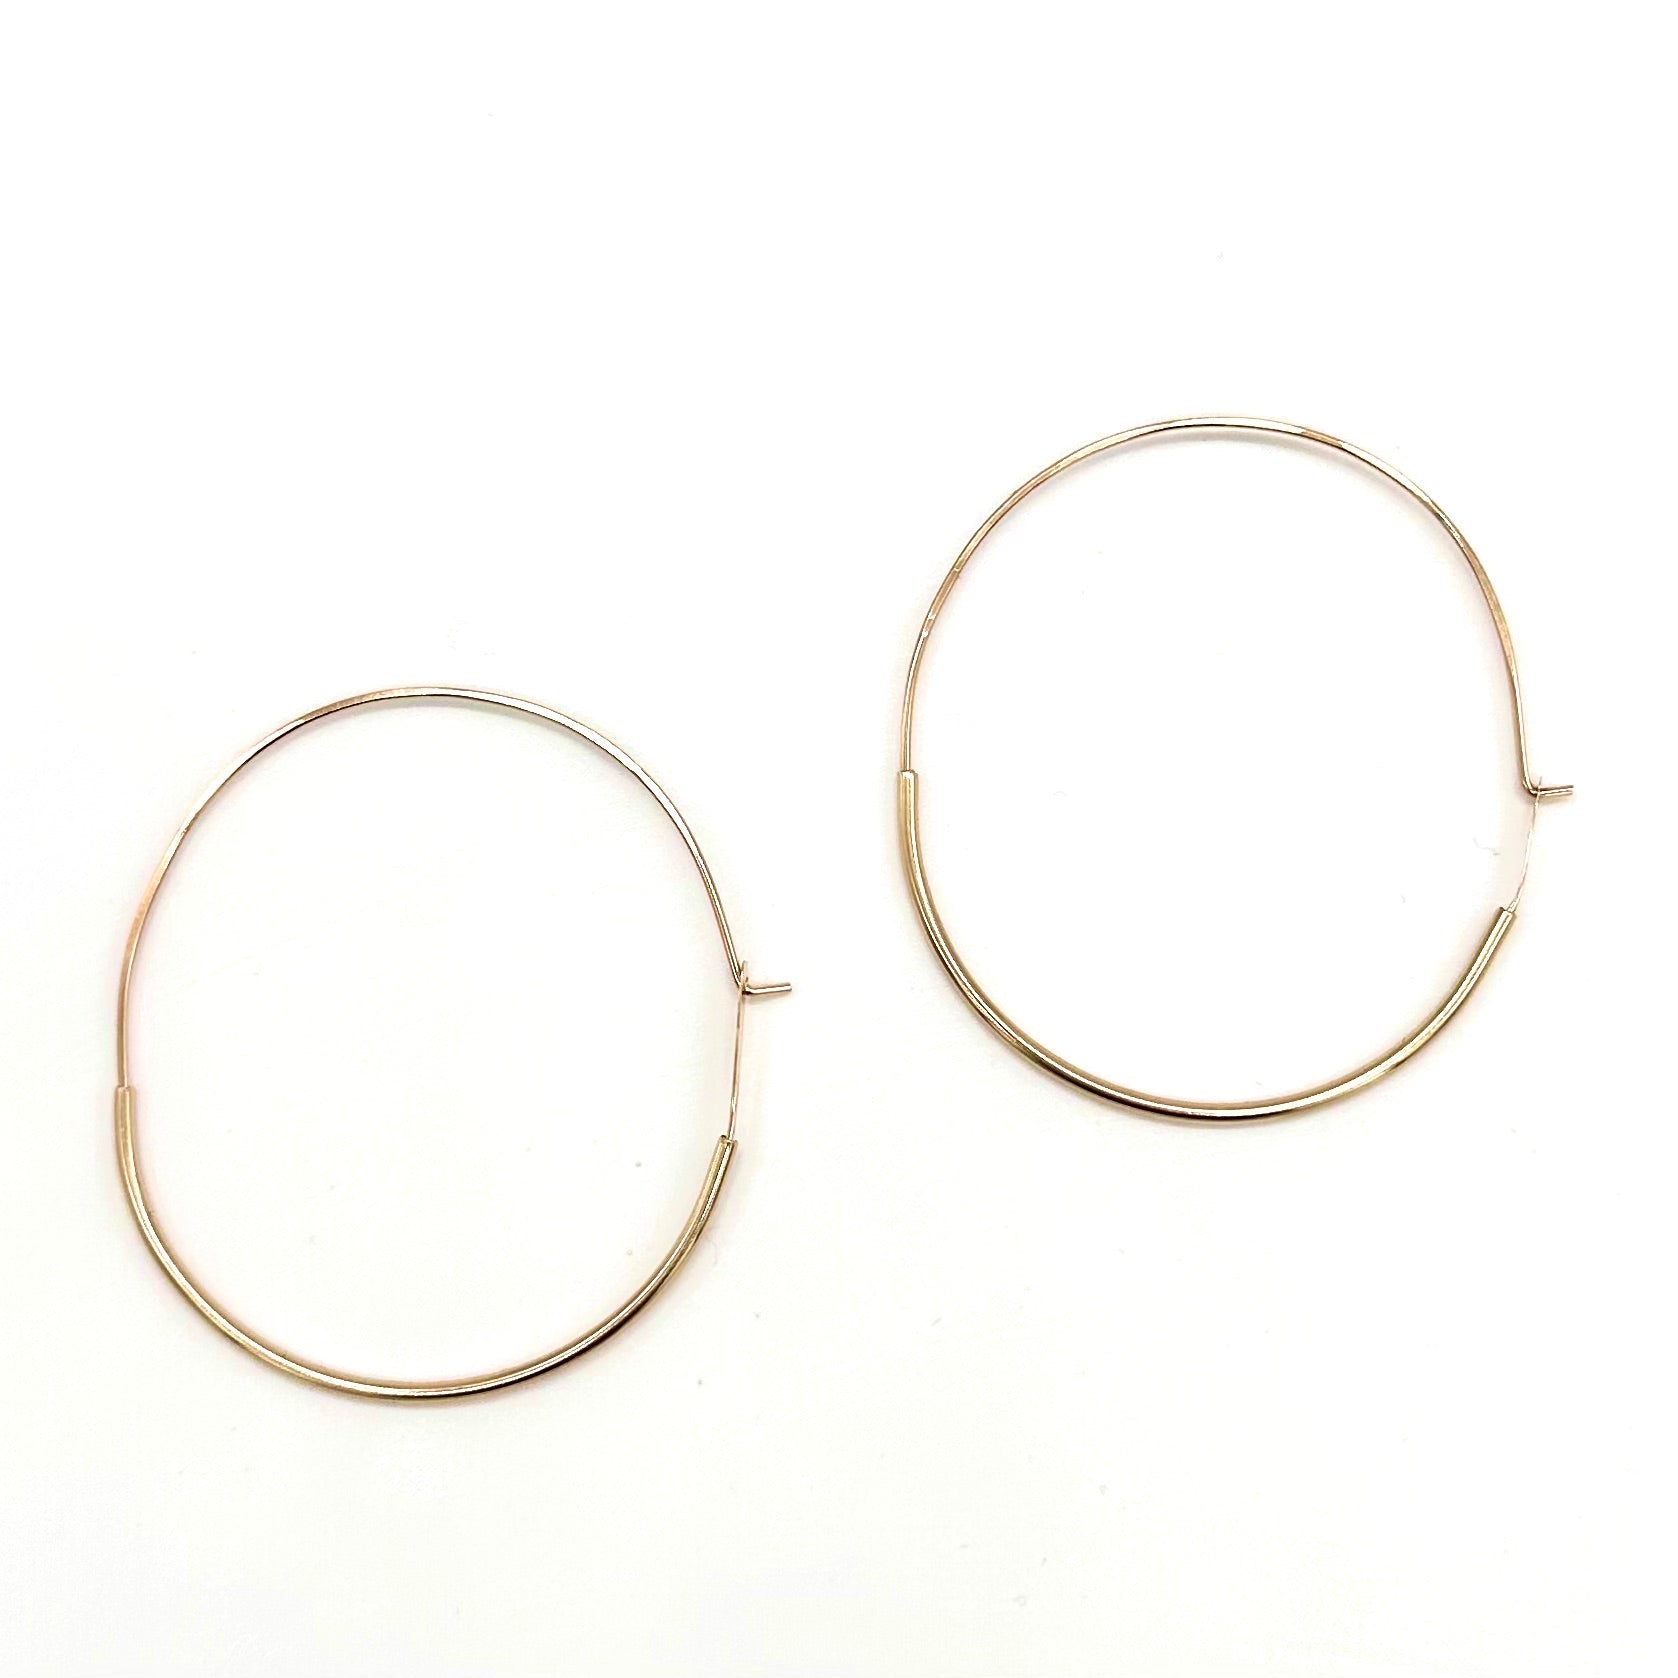 Classic Gold Tubed Hoops - 14kt Gold-Filled - Nickel Free Hypoallergenic